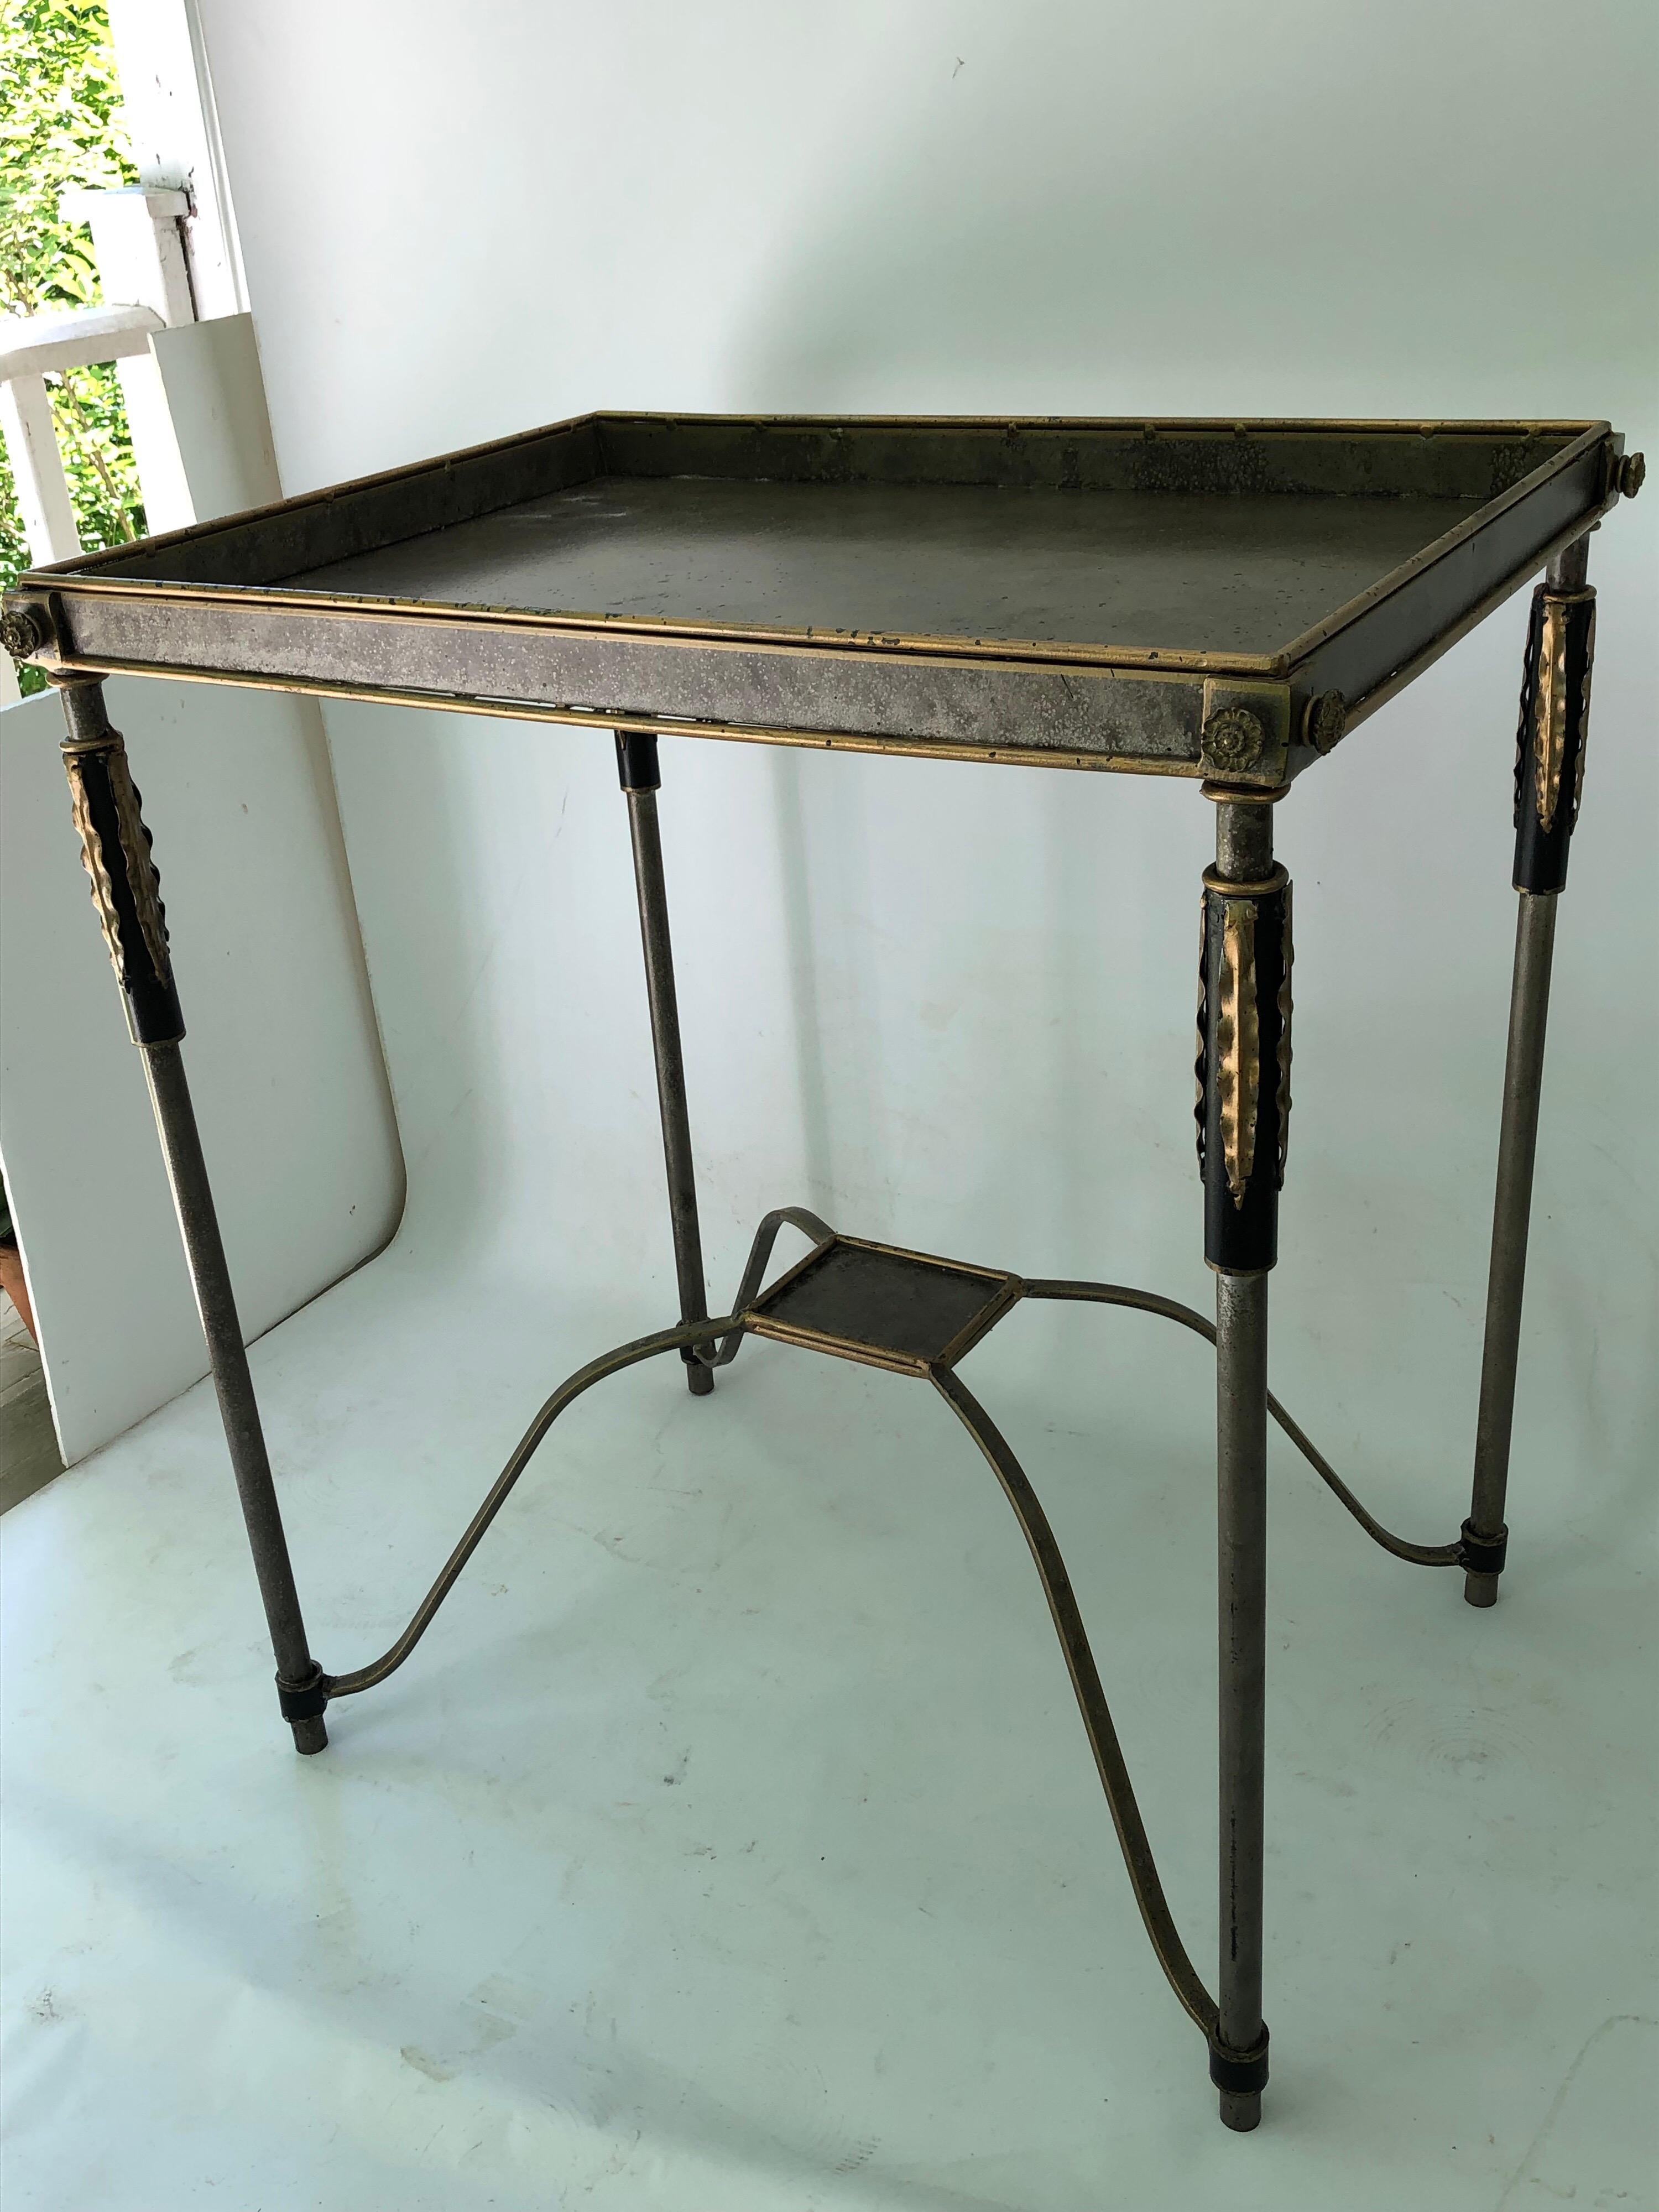 Handsome modern metal and gilt-decorated metal stand. Would even work well on a porch since it is metal.